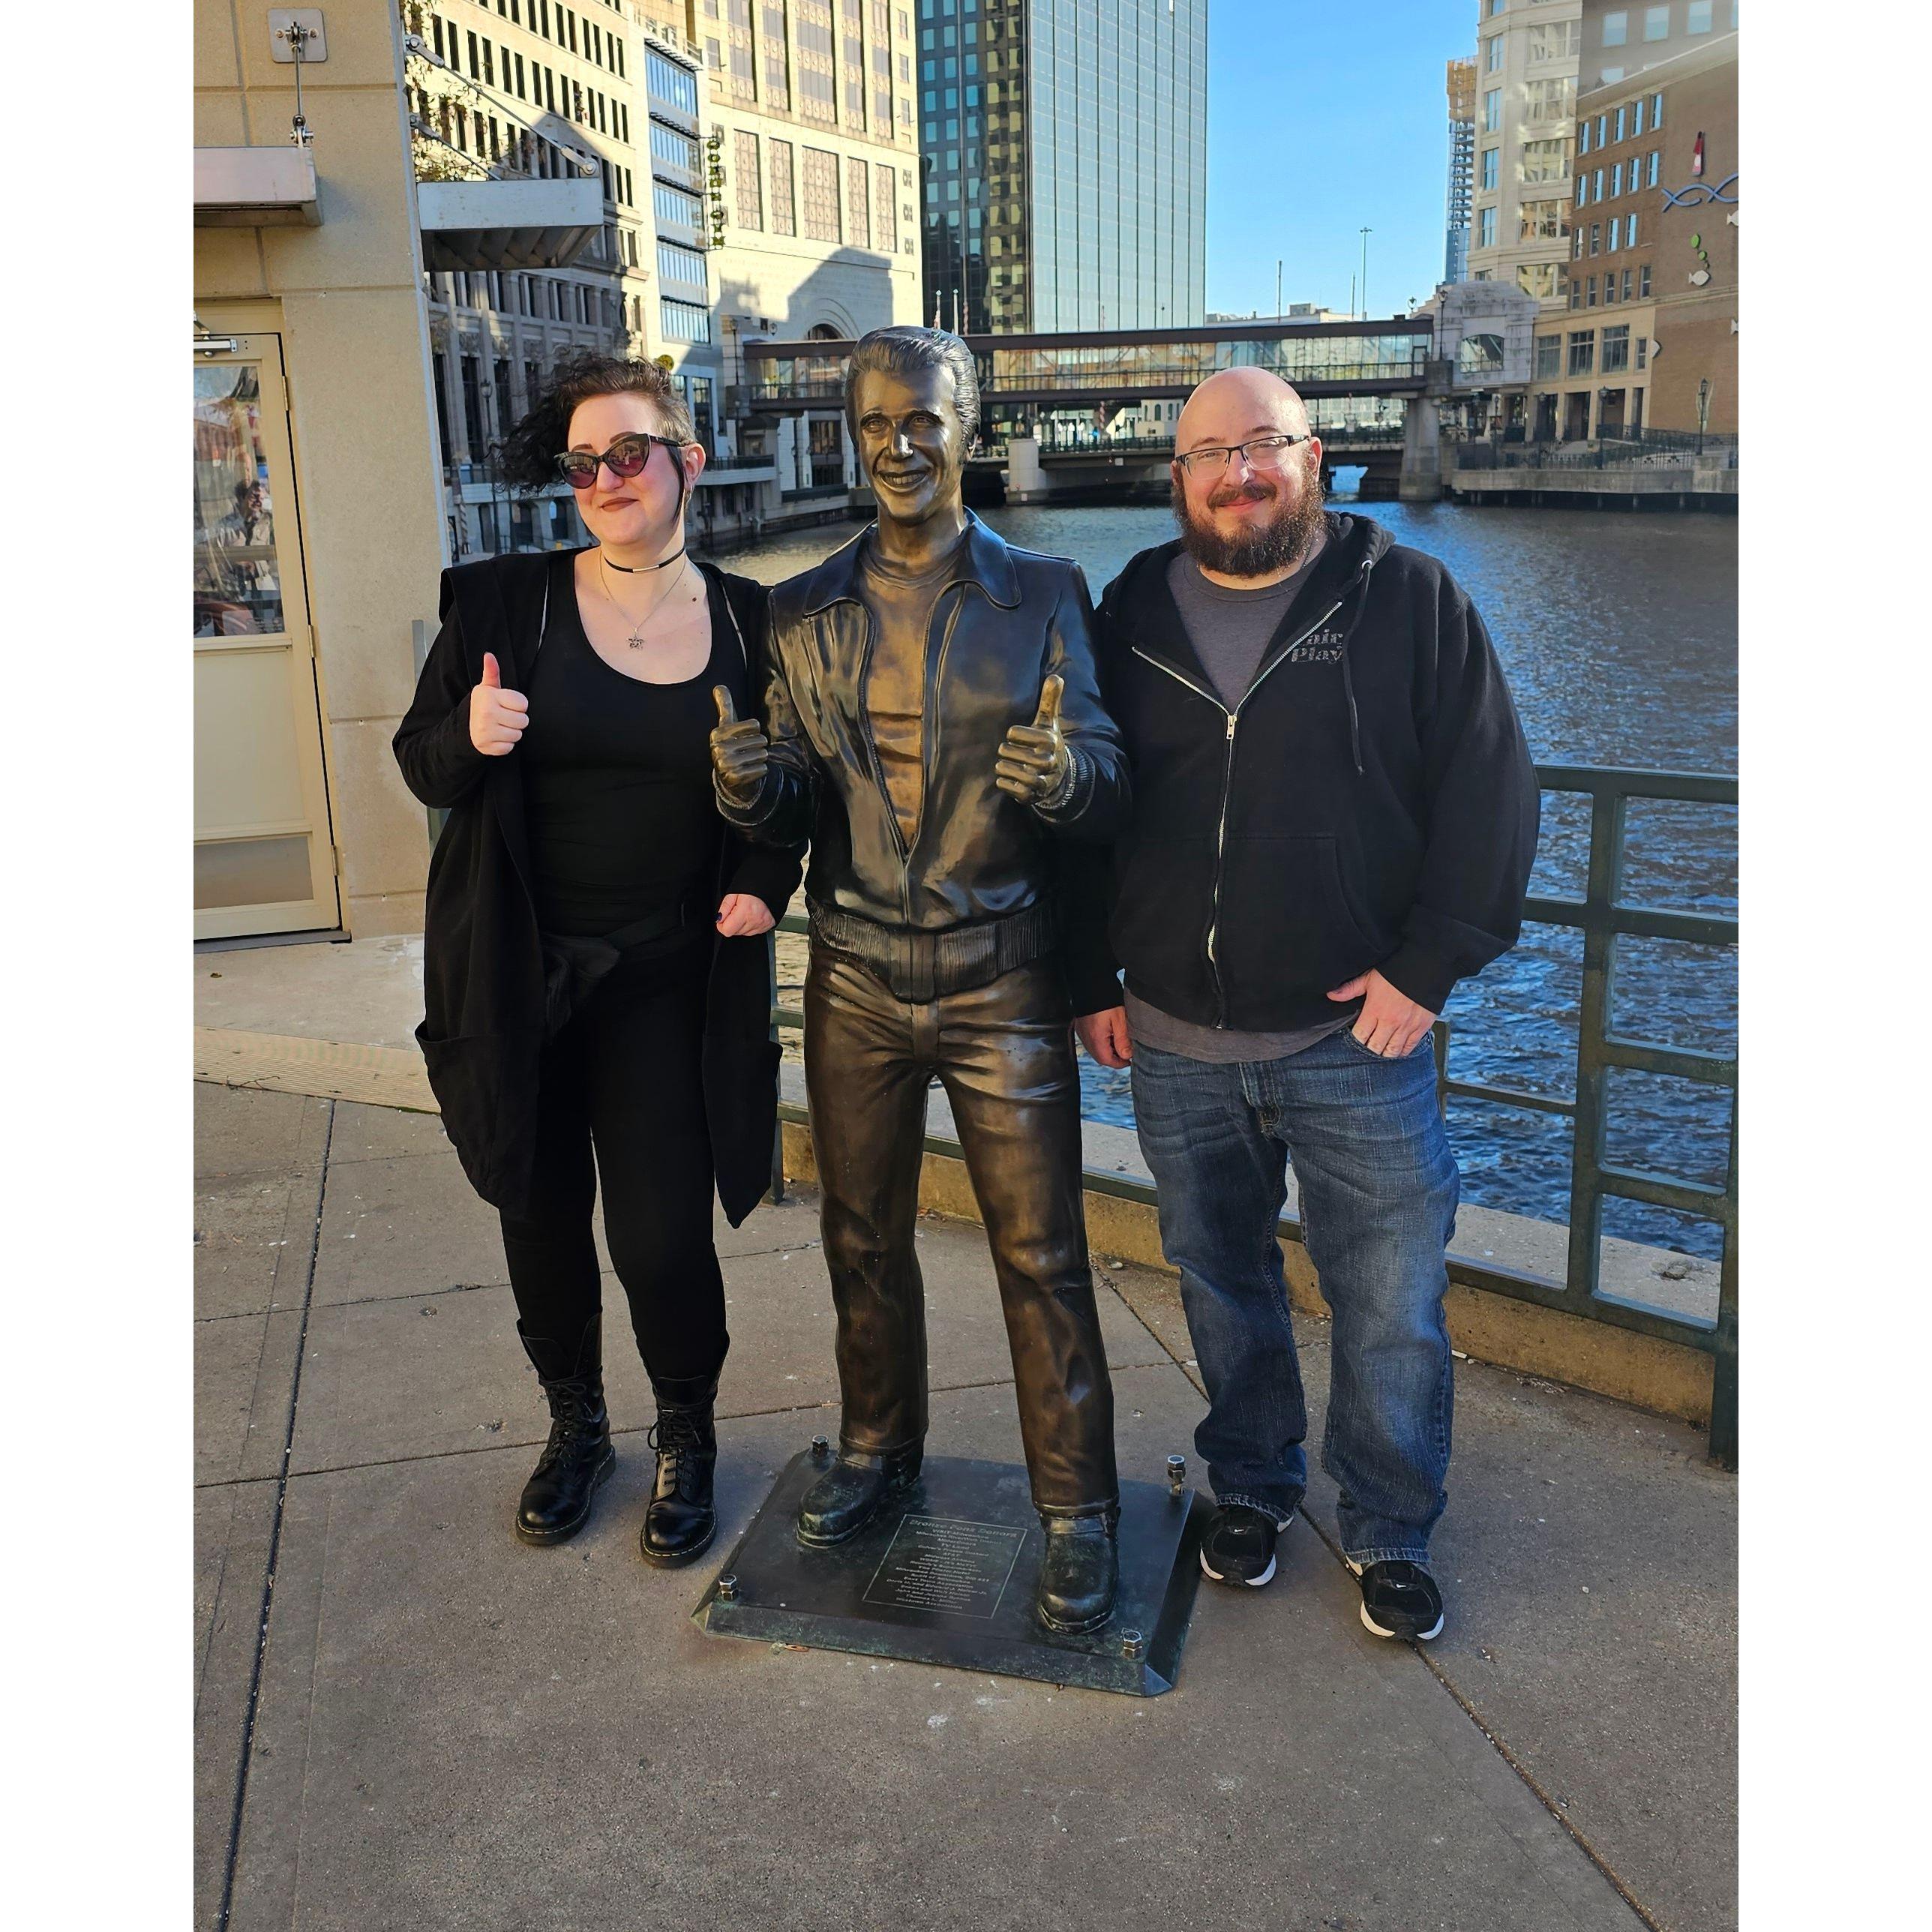 While visiting Milwaukee, Lauren got to pose with two of the biggest sex symbols to come from the Midwest. Aaaaayyy!